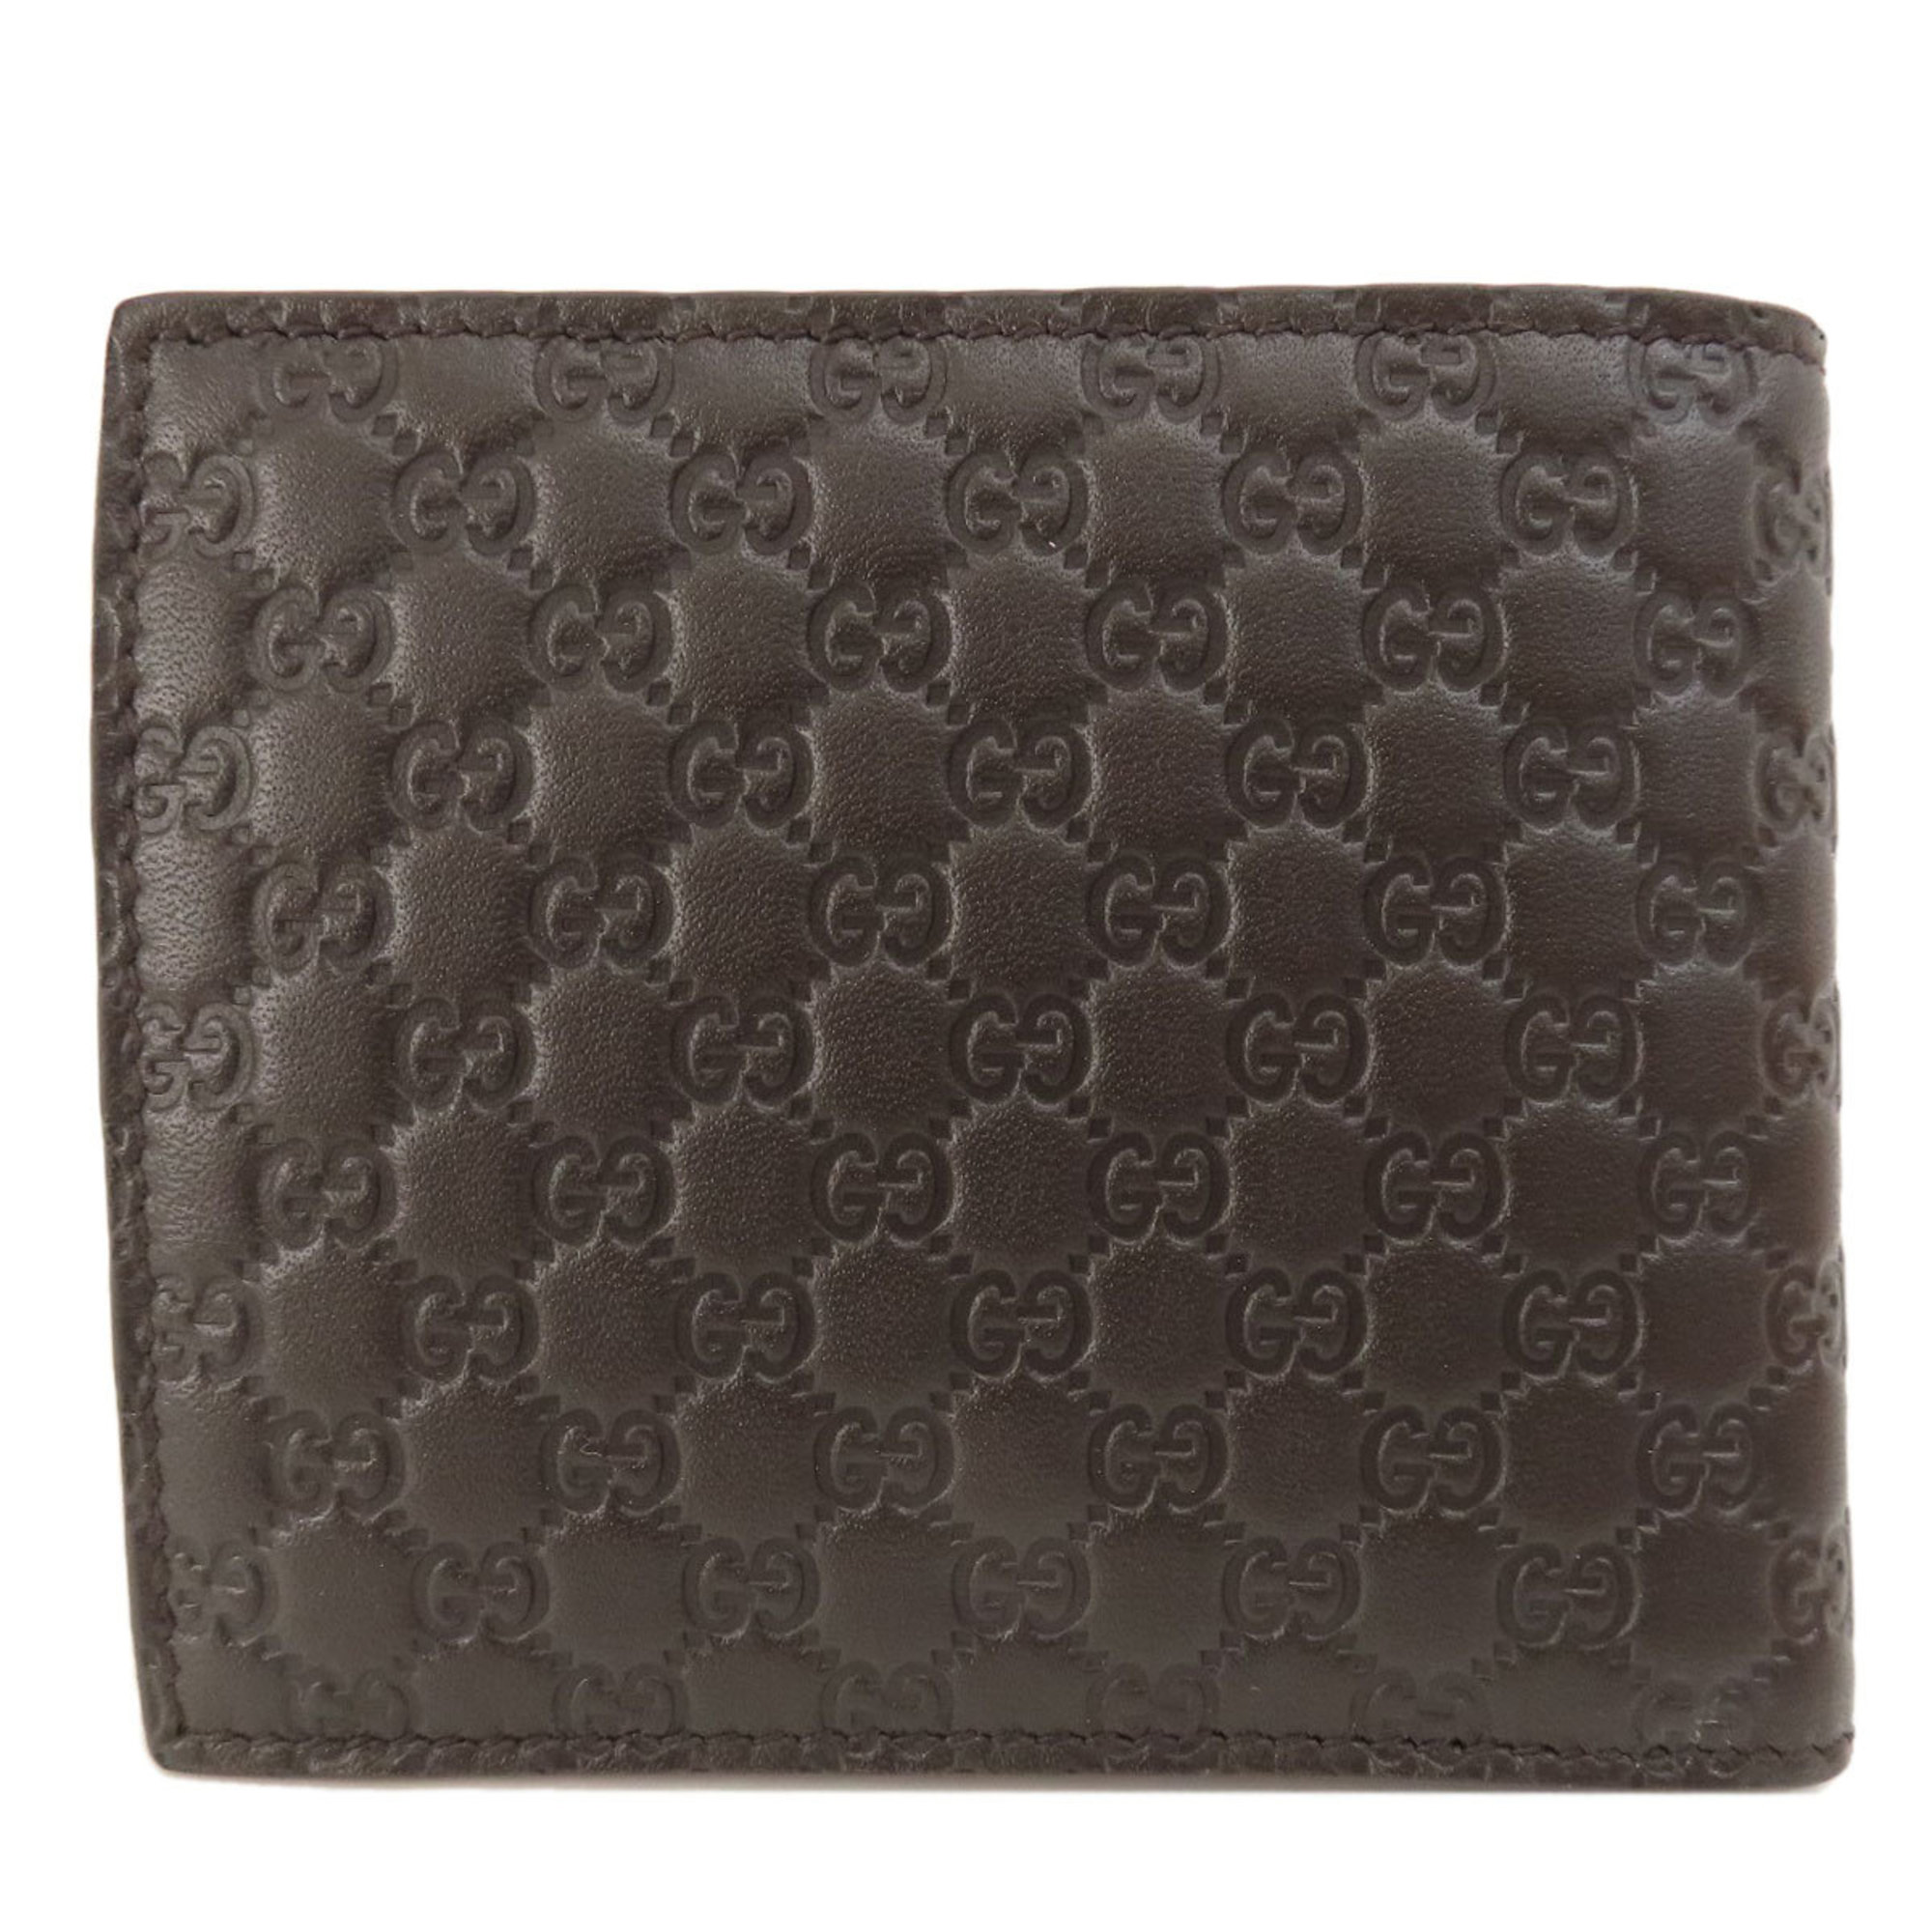 Gucci 544472 Micro Guccissima Outlet Bi-fold Wallet Leather Women's GUCCI